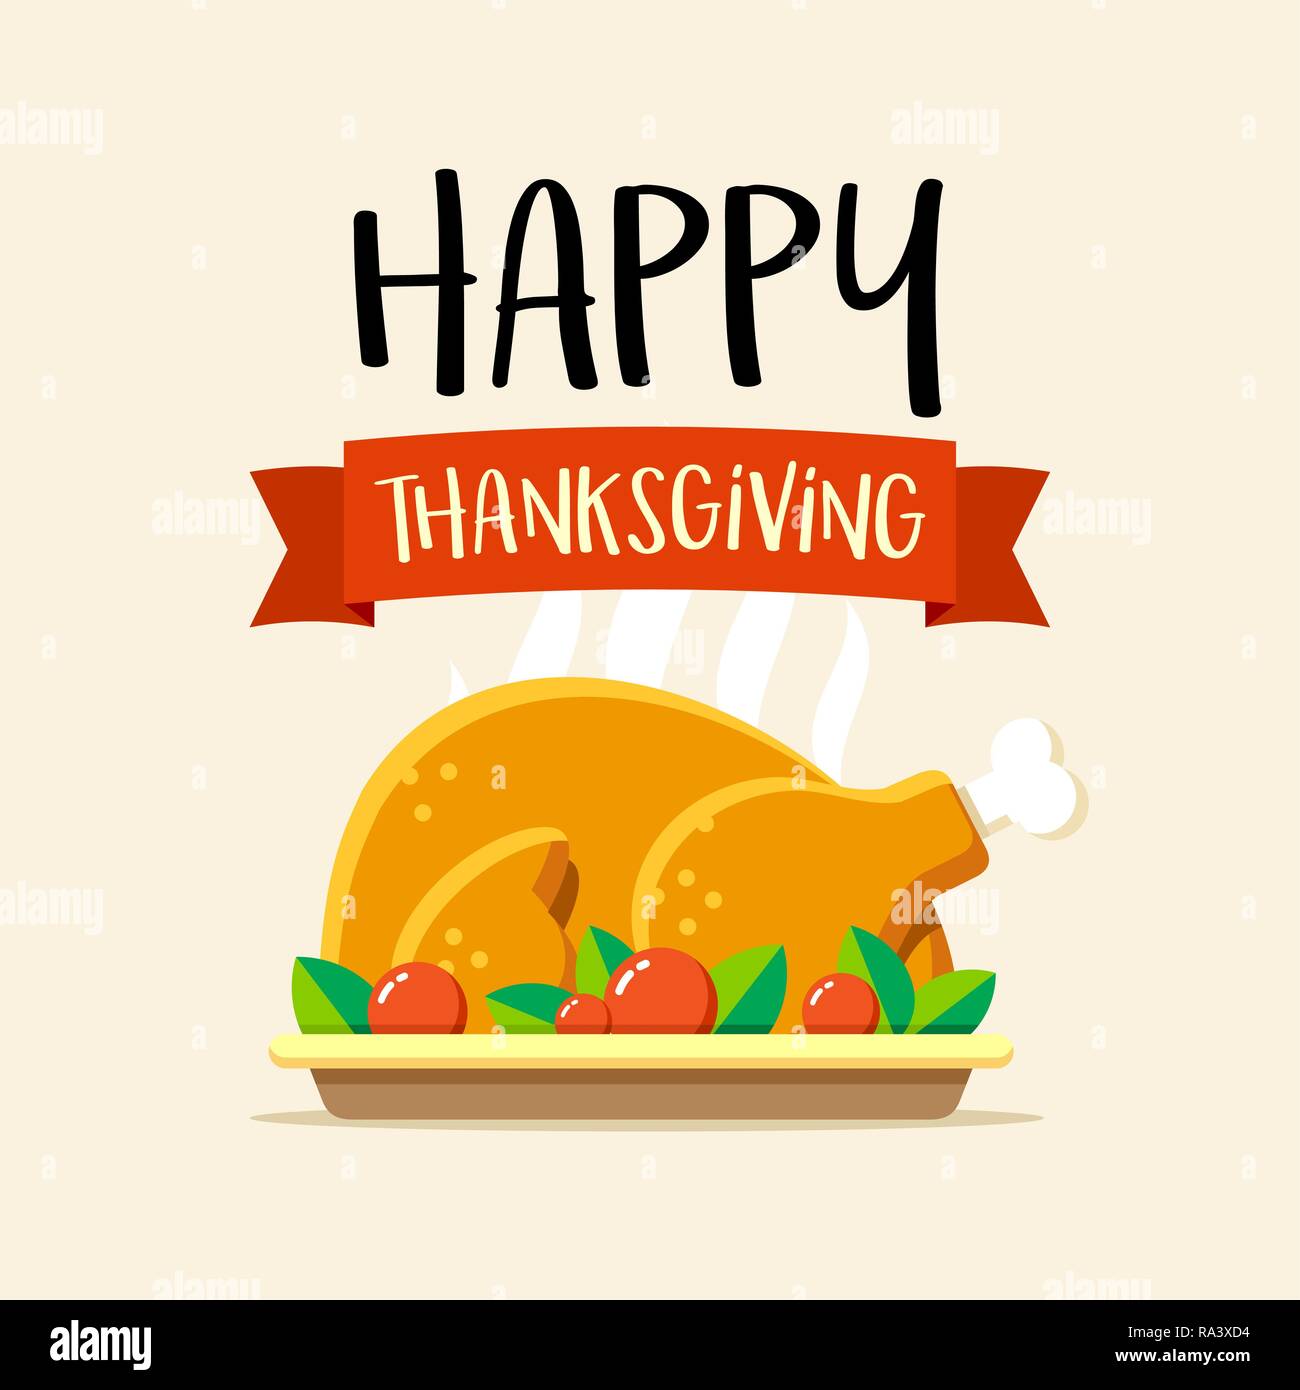 Happy Thanksgiving day vector greeting card with turkey on plate. Flat celebration illustration Stock Vector